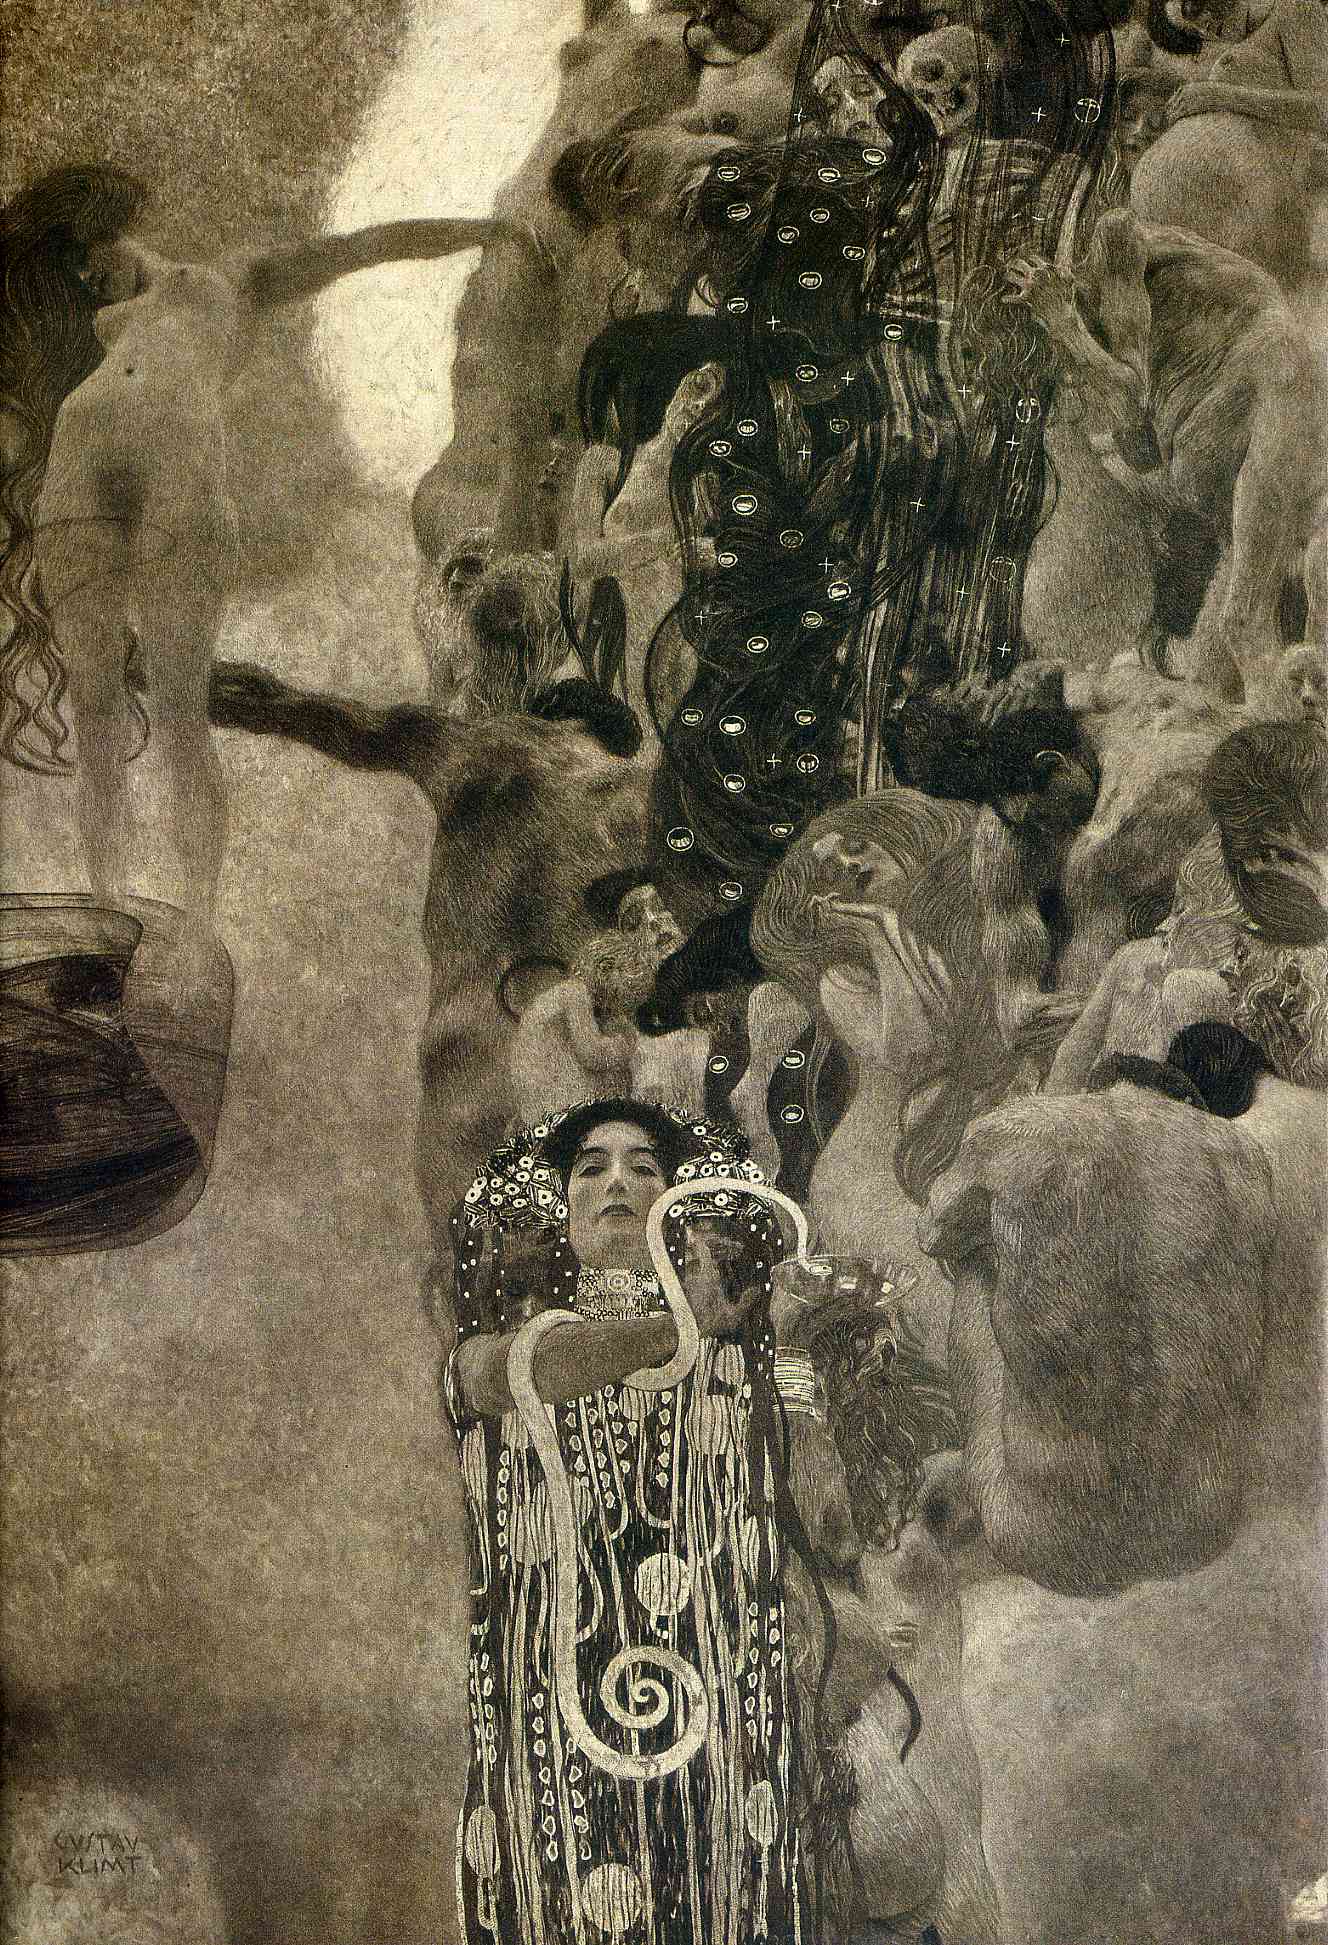 Detail from a black and white photograph of Gustav Klimt's Medicine (c. 1907). The original was destroyed by the Nazis in 1945